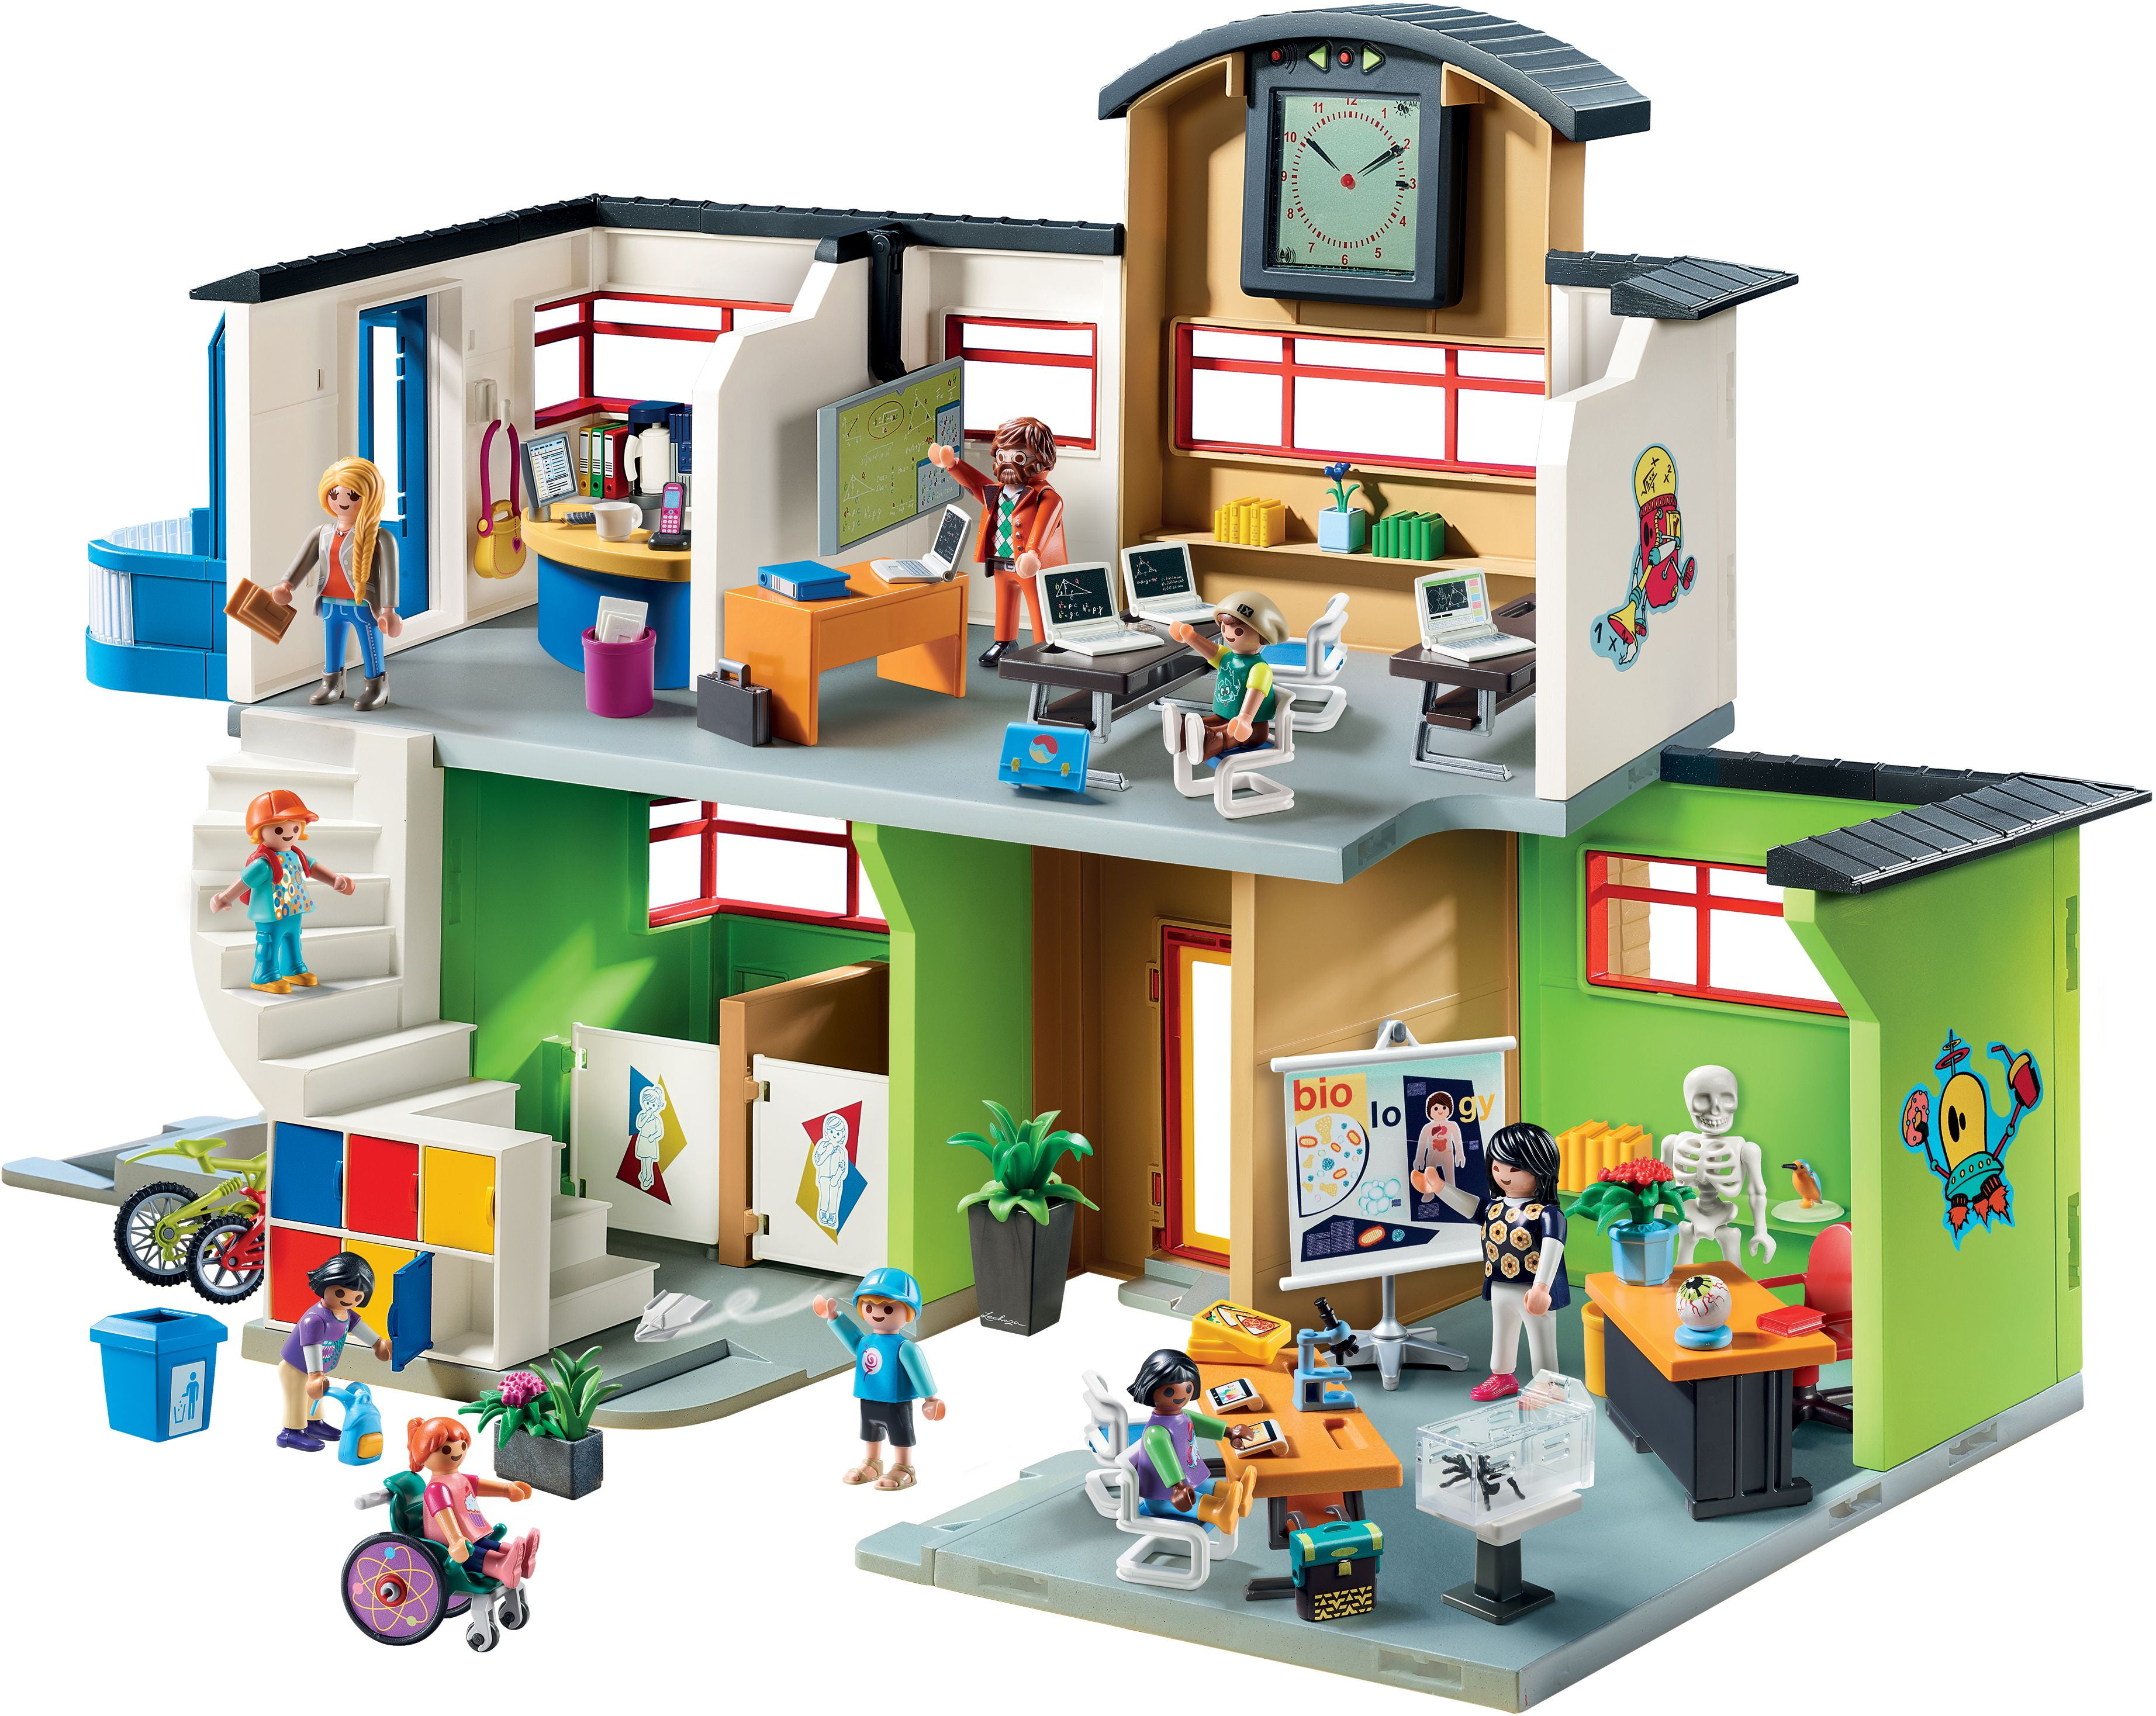 PLAYMOBIL Build & Play SCHOOL PLAYSET w/Lots of Extra Figures